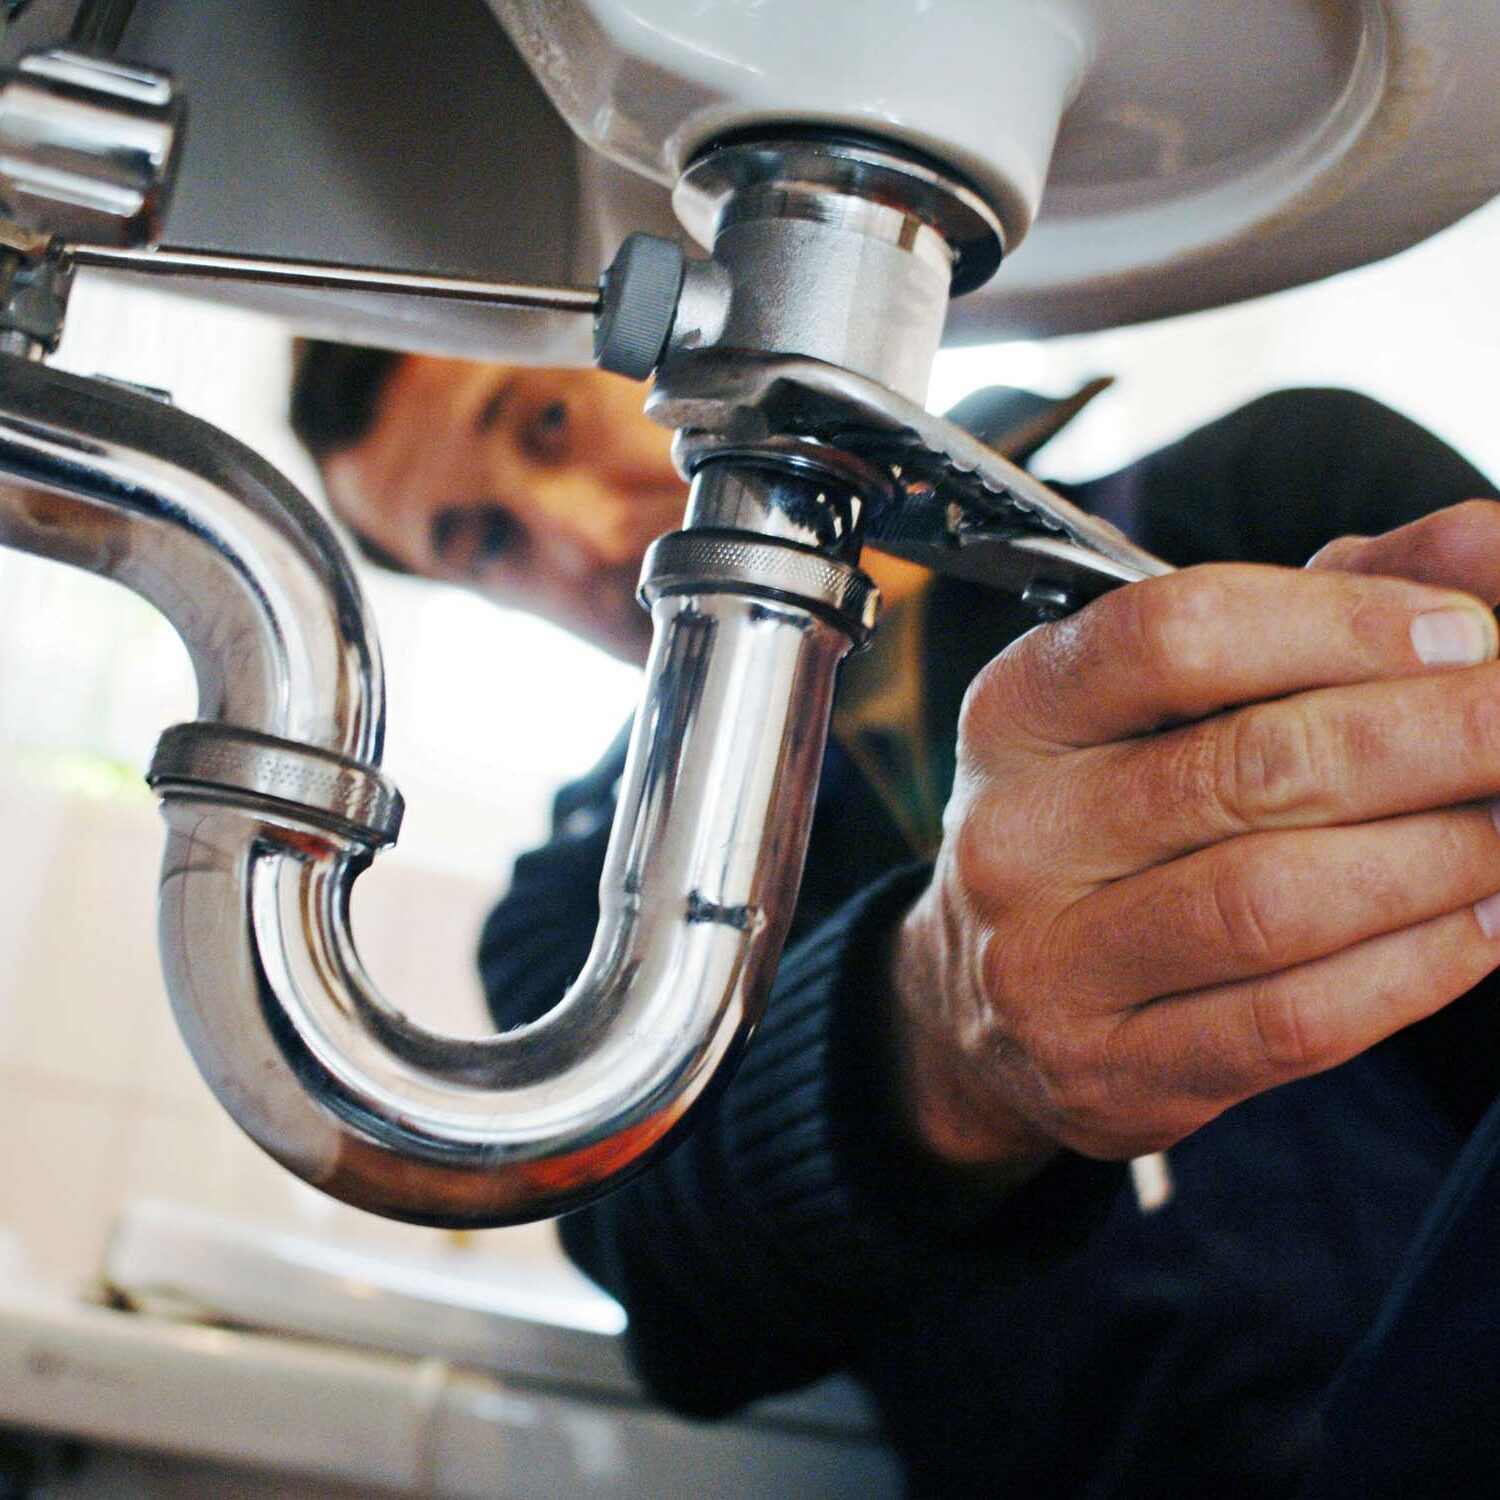 Close-up of plumber repairing sink. Male worker using tool while fixing appliance in bathroom. He is working on metallic equipment at home.